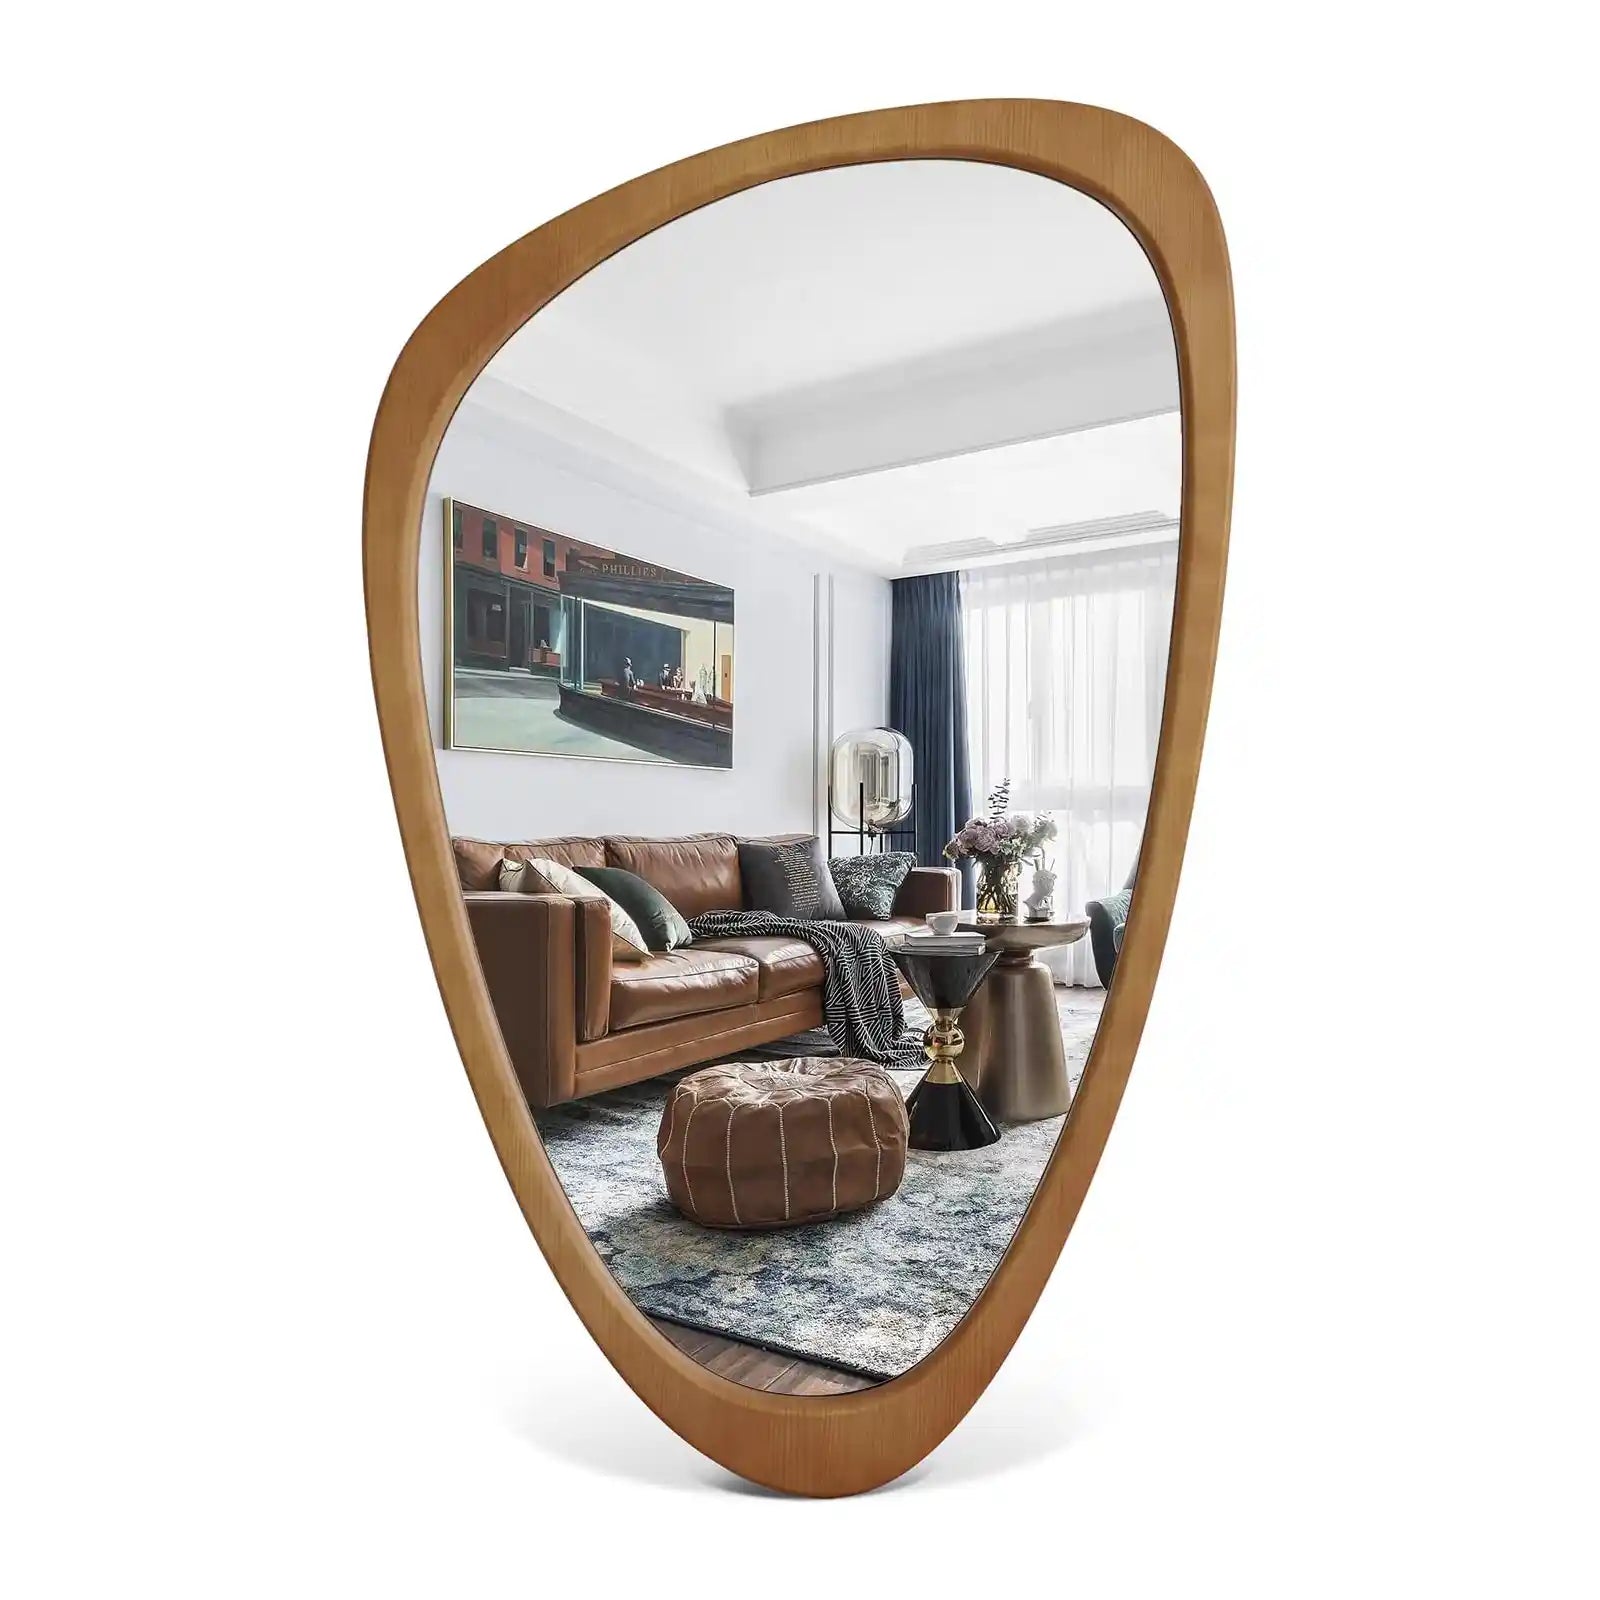 Irregular Mirror, Wall Decor, Wood Wall Mirrors Decorative for Living Room, Bedroom, Bathroom, Entryway, Wall Mounted Asymmetrical Mirror, Large Size